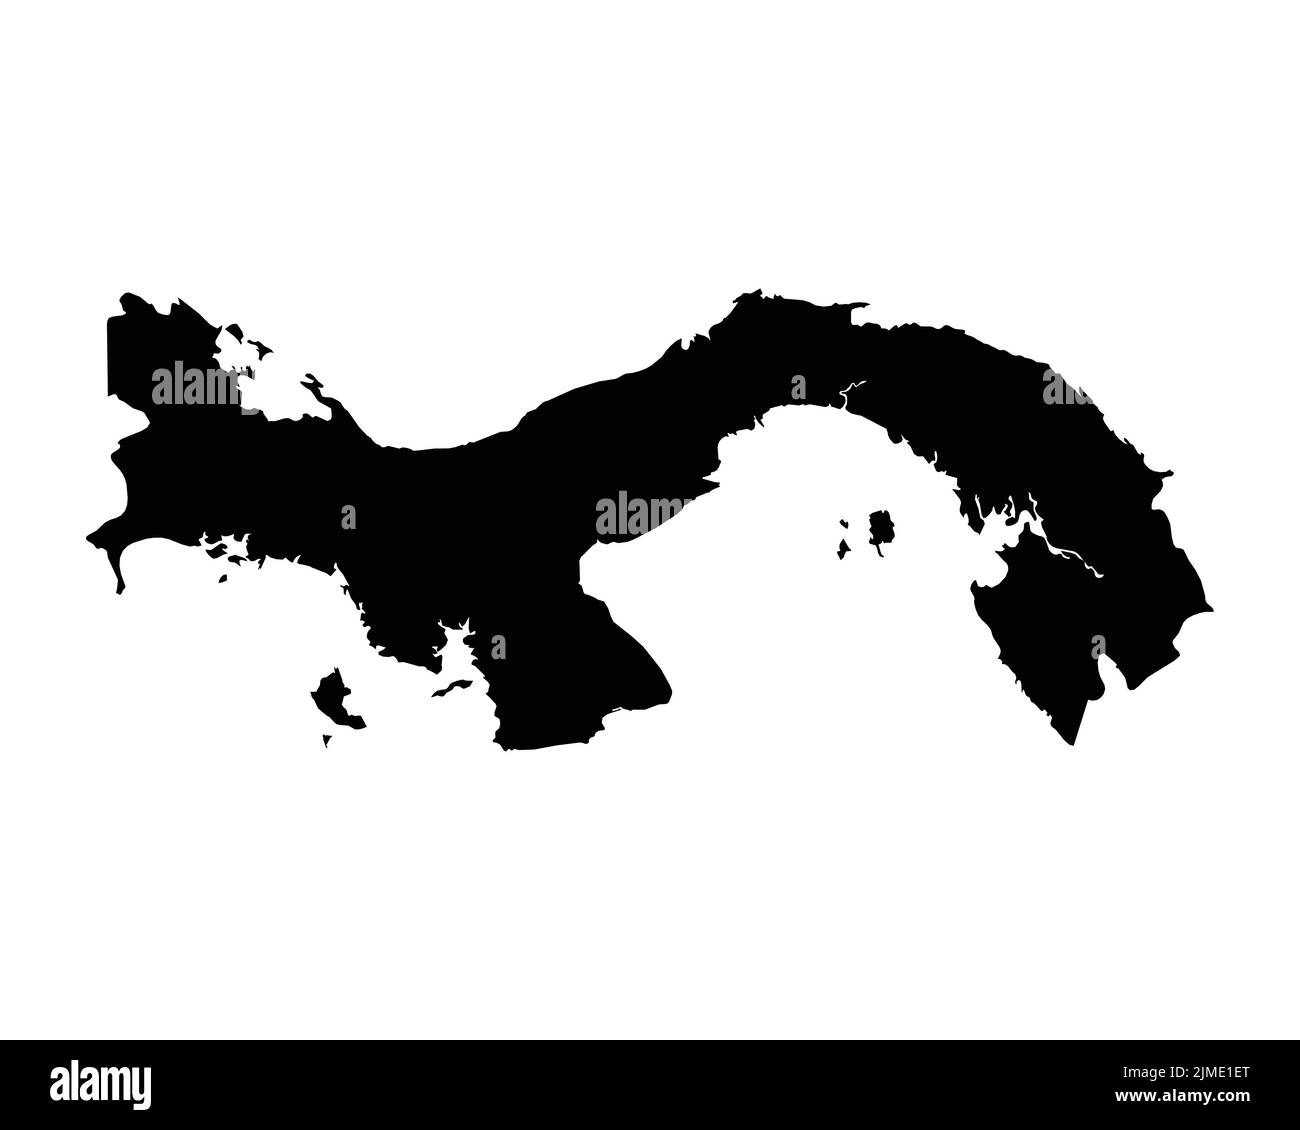 Panama Map. Panamanian Country Map. Black and White National Nation Geography Outline Border Boundary Territory Shape Vector Illustration EPS Clipart Stock Vector